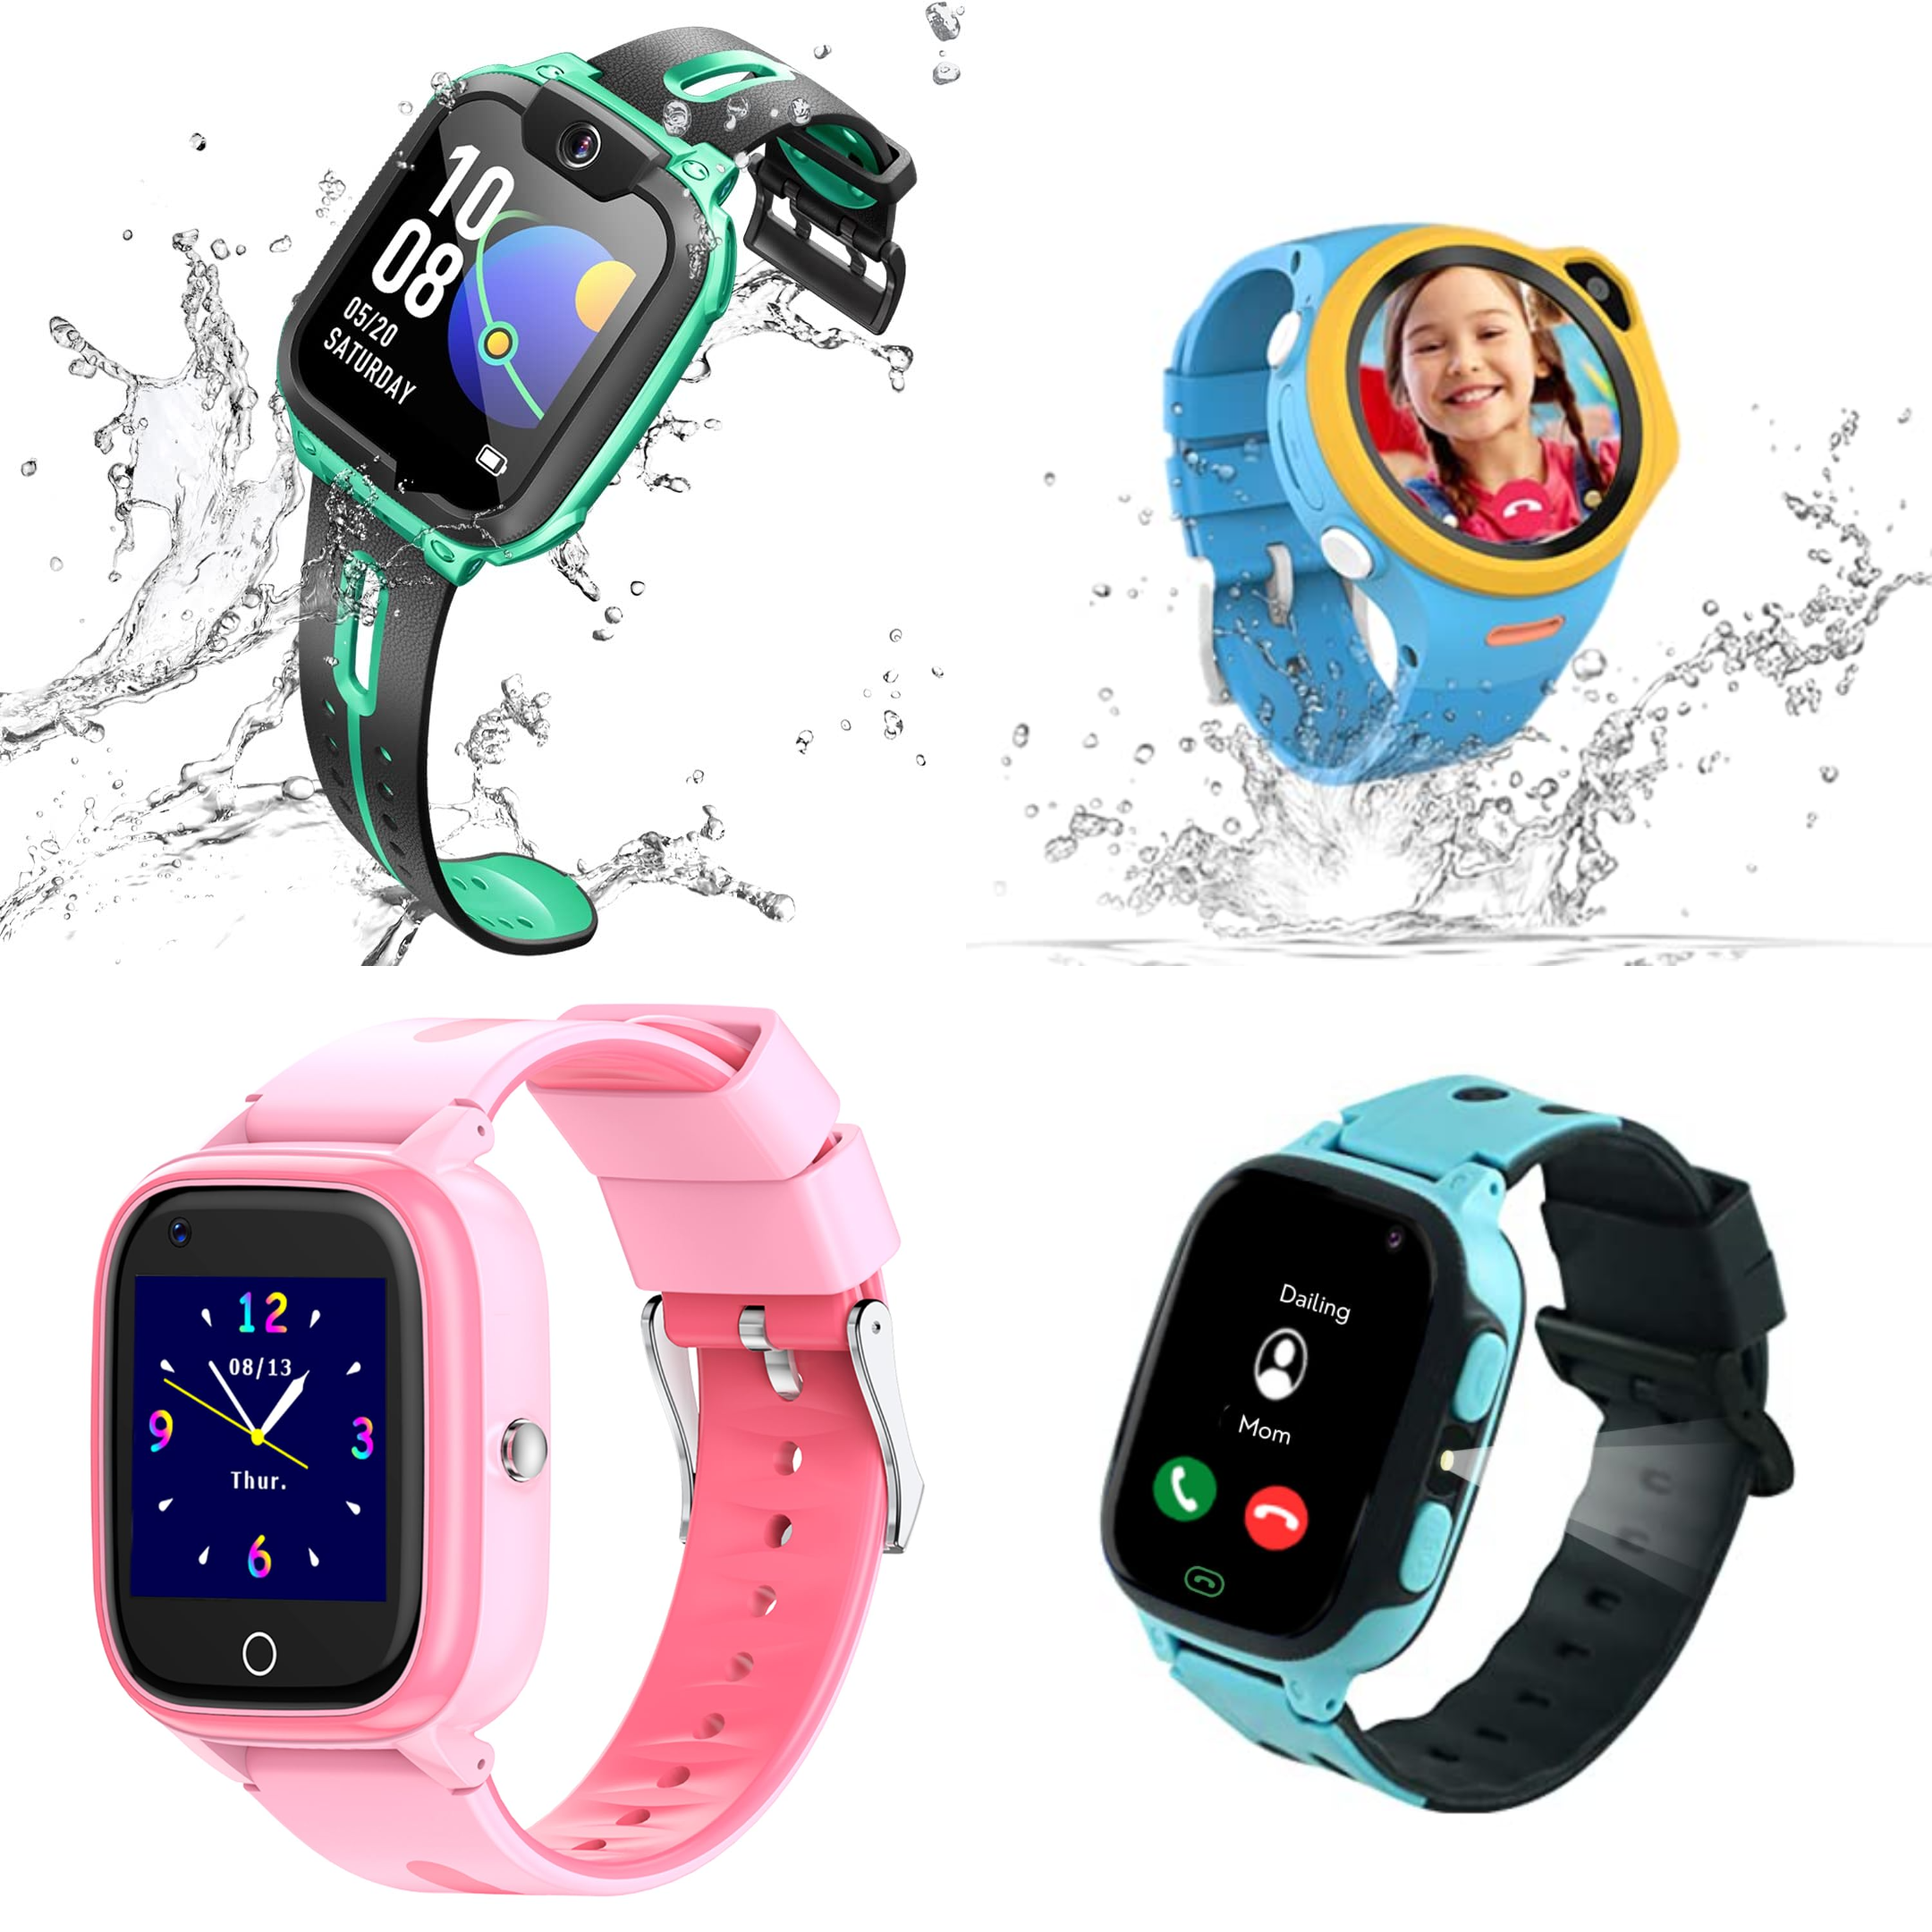 Best smartwatches for kids, Image Credit: Amazon